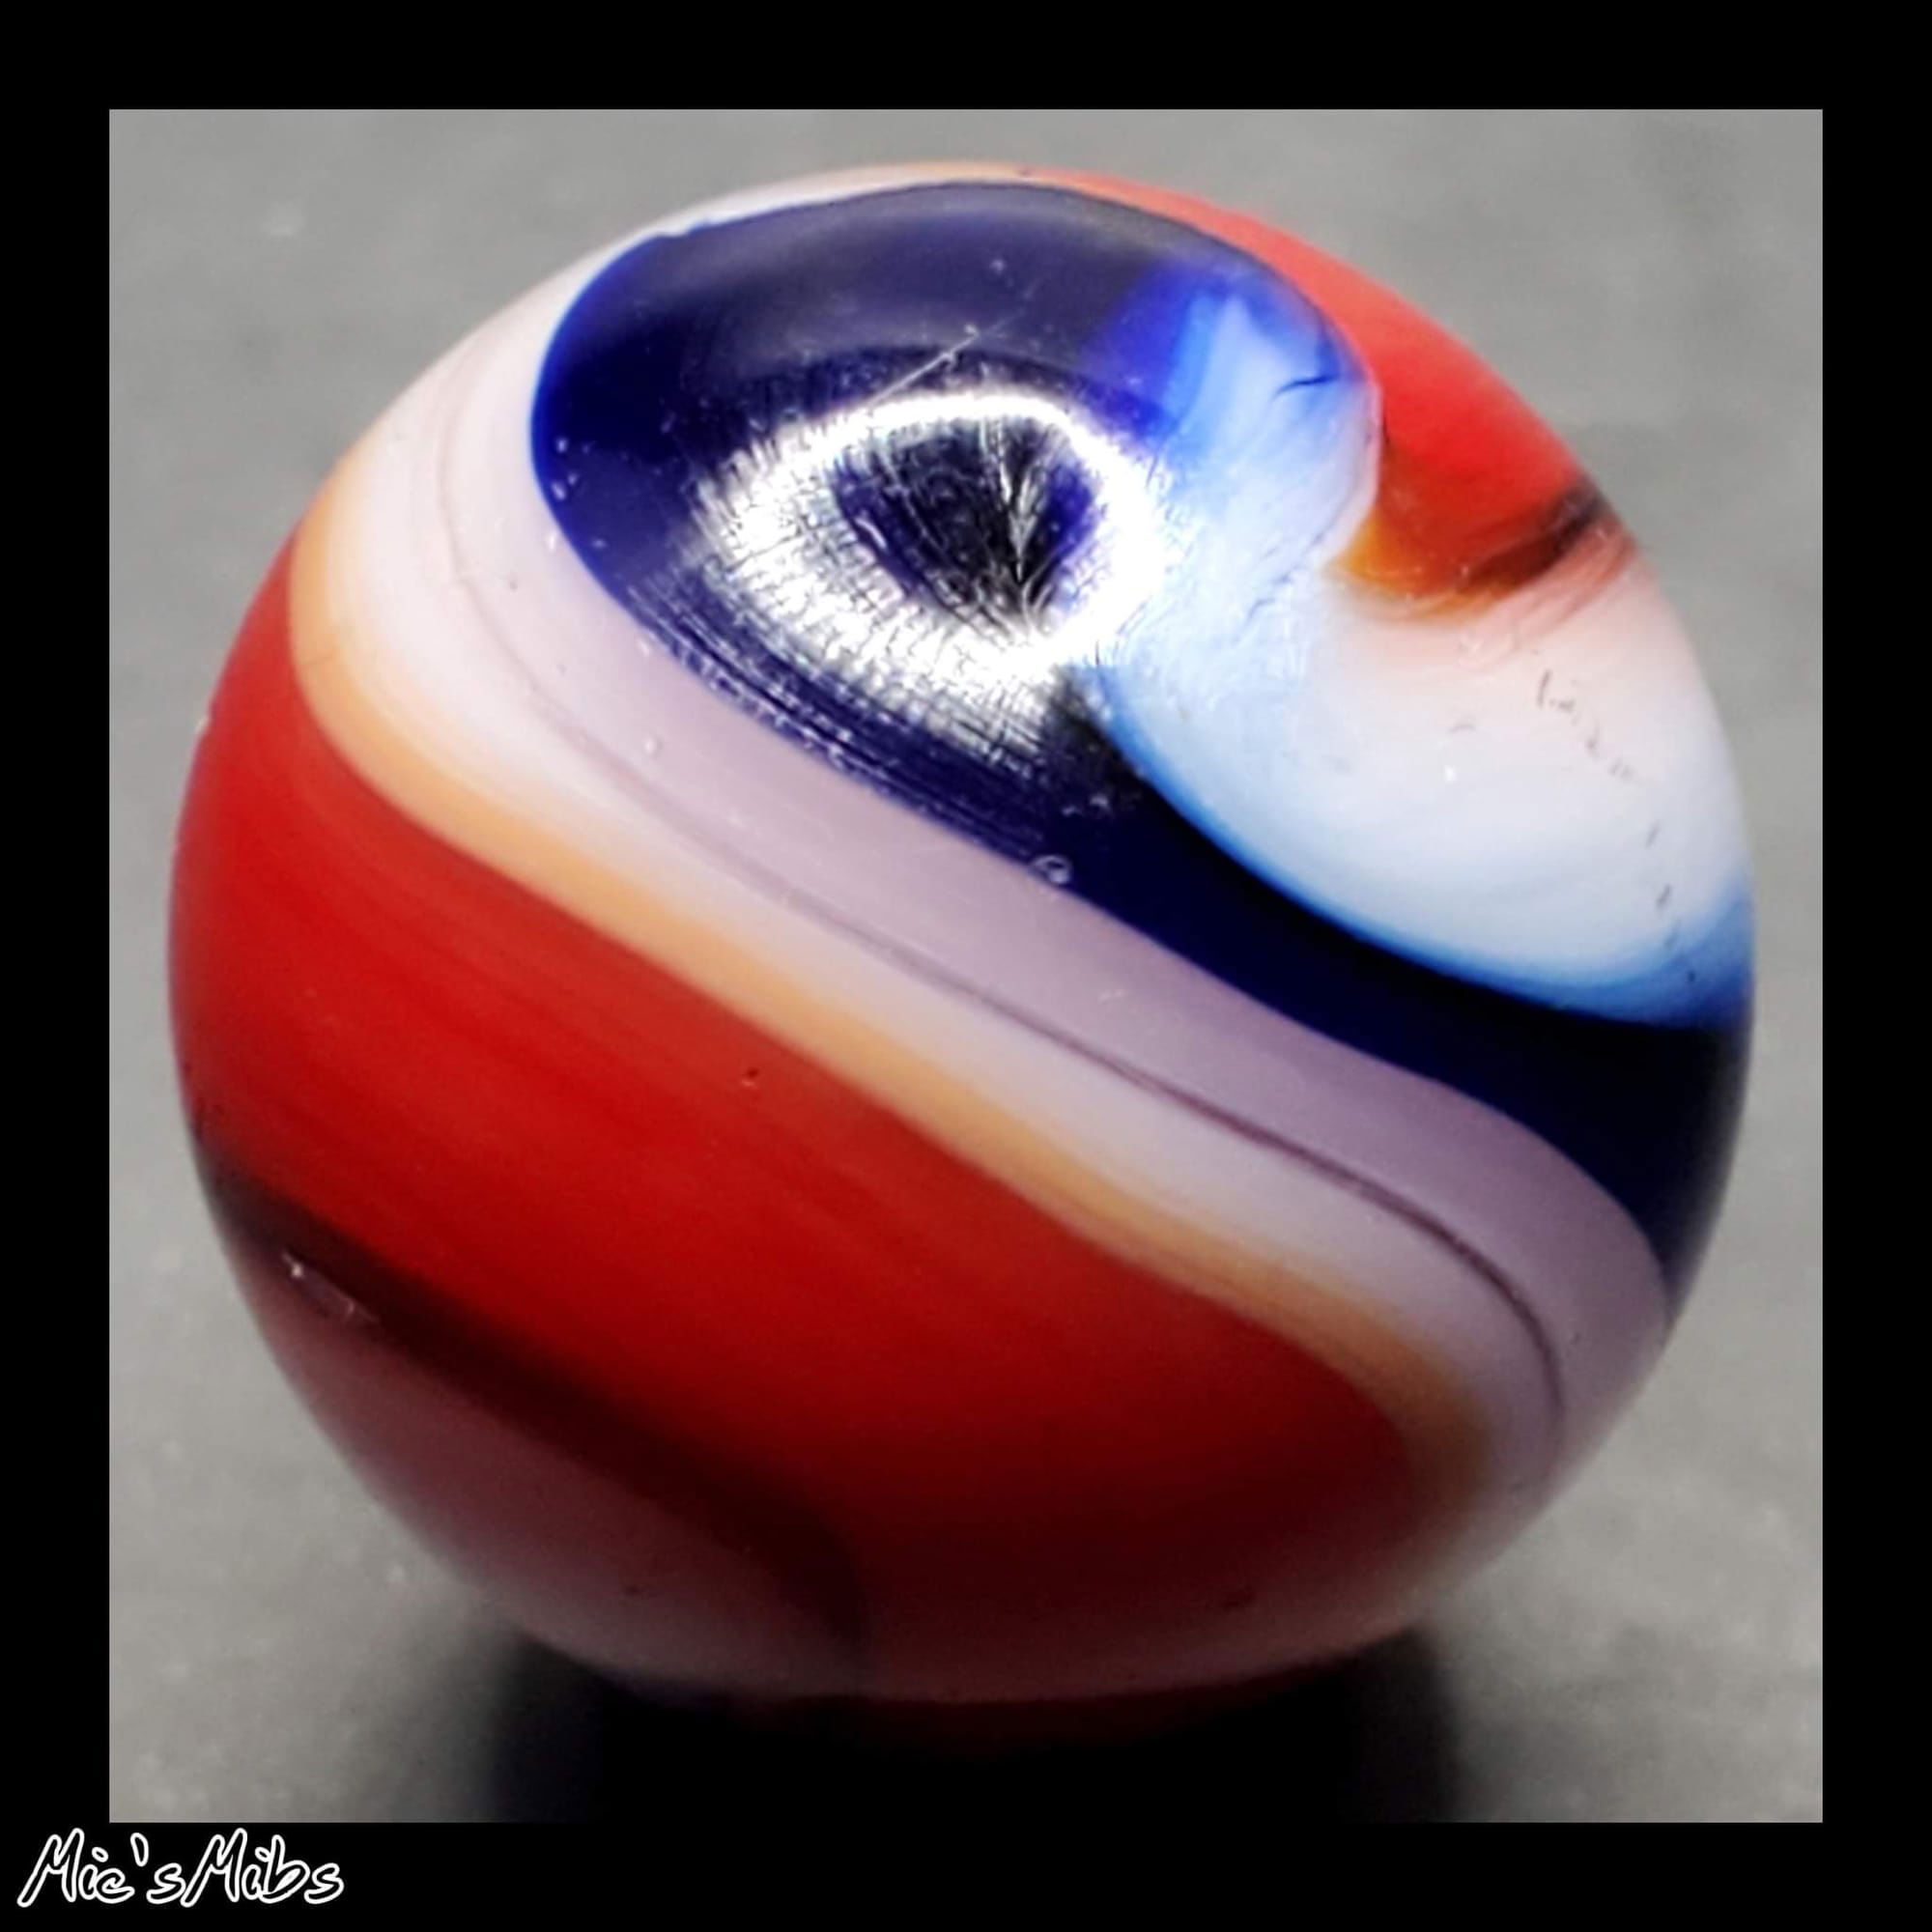 $77 5/8" Akro Blue & Red Popeye with Blended Hybrid Orange and an extra stream of Dark Blue  NM++